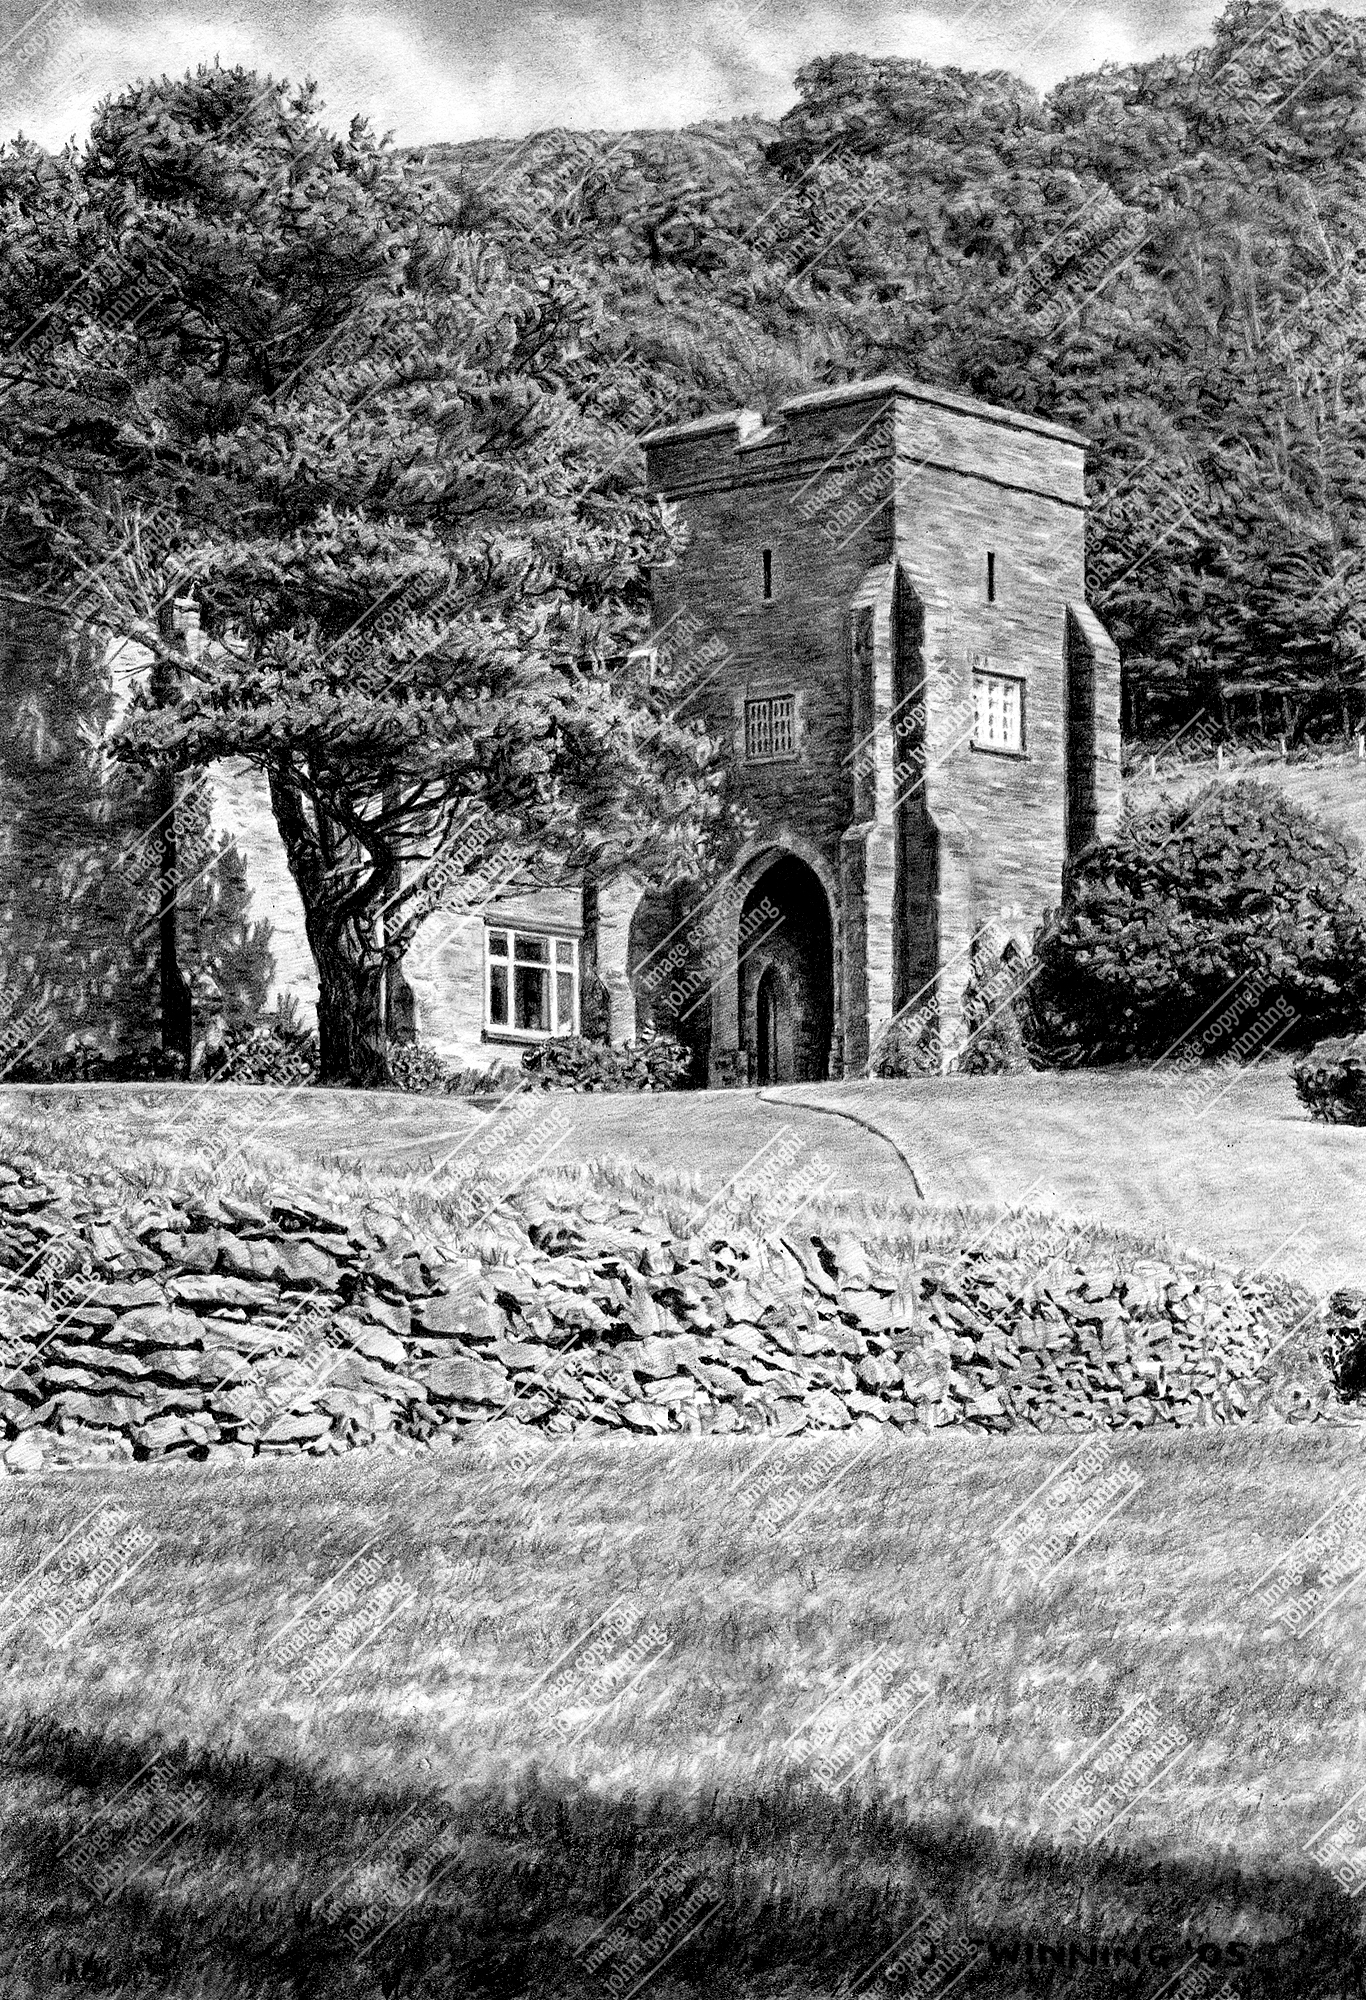 'Lee Abbey, God is our refuge' - art print from a pencil drawing of this north devon based christian retreat centre